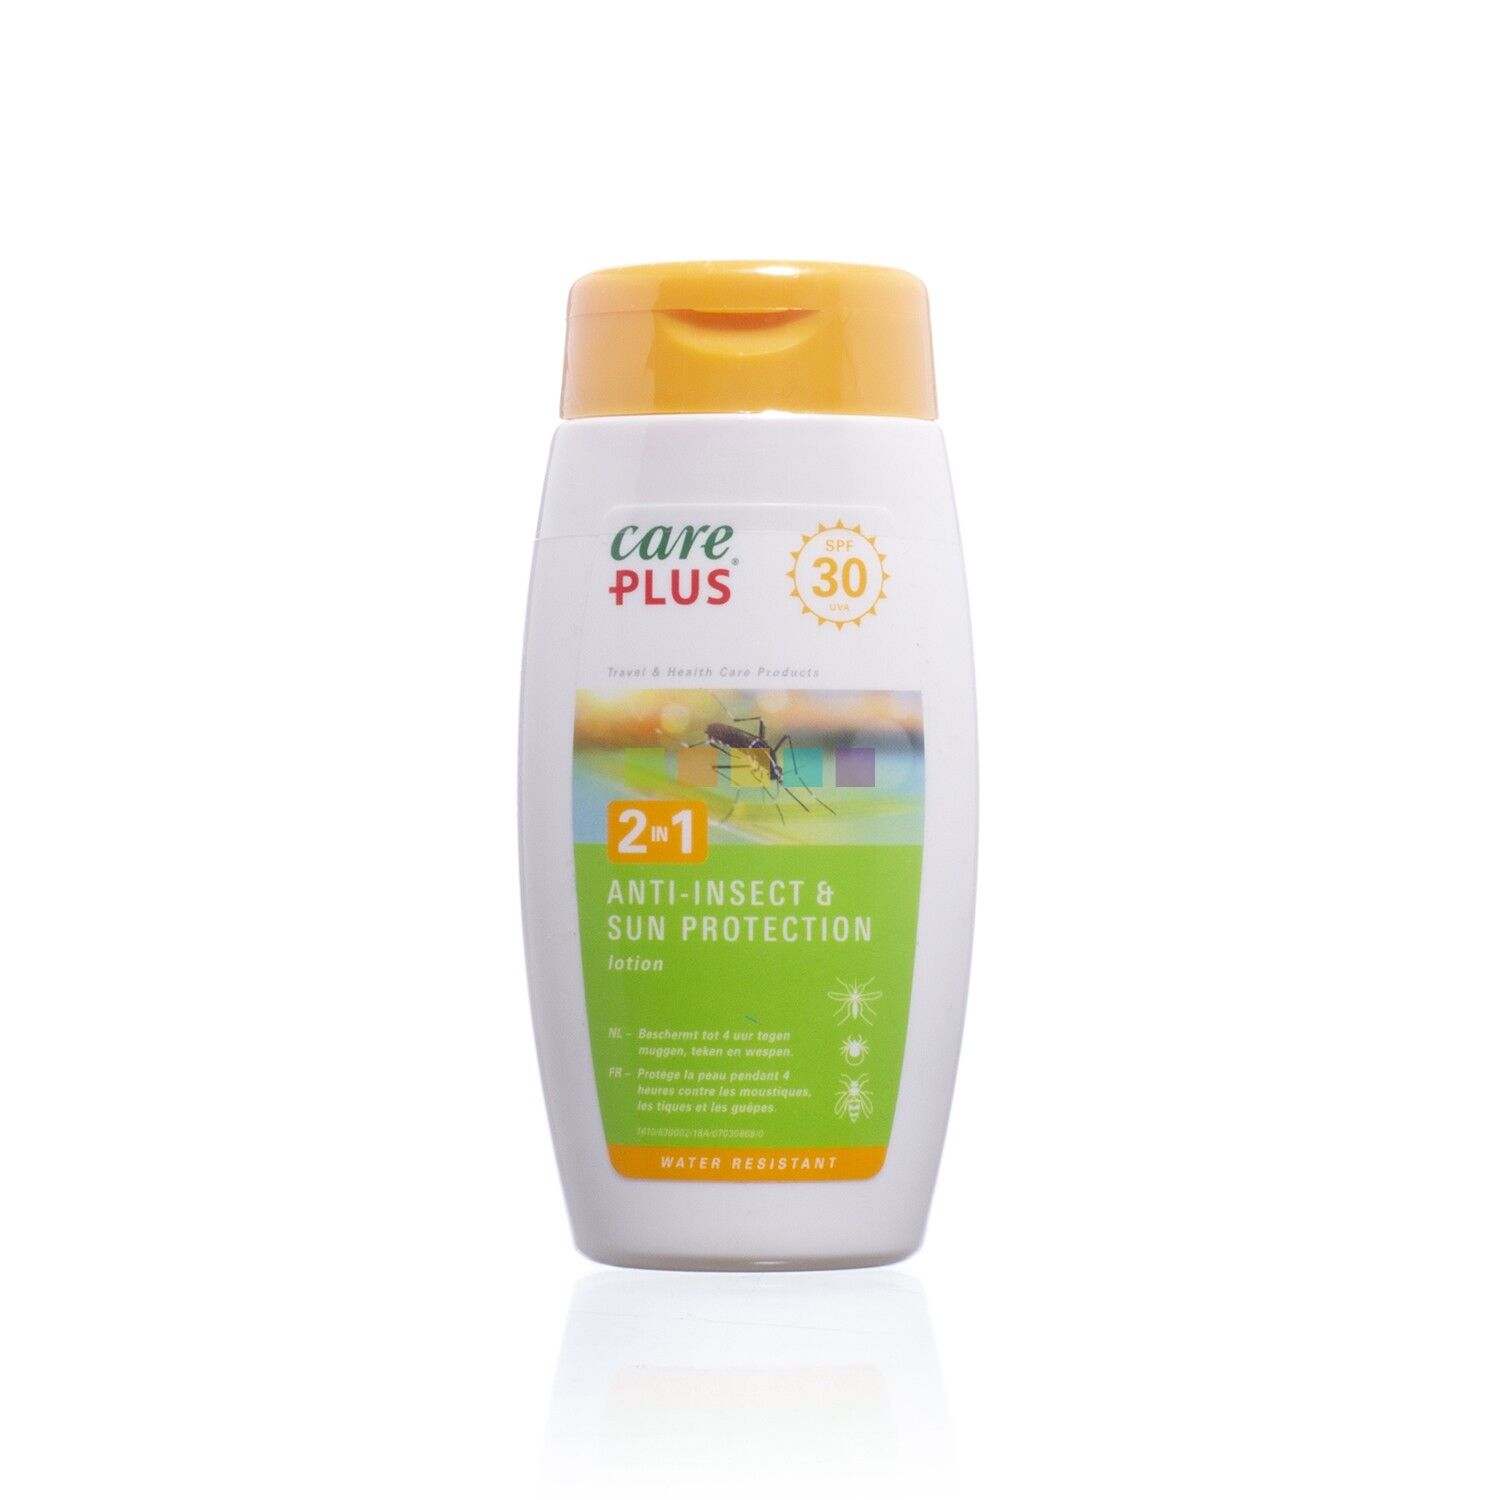 Care Plus 2in1 Anti-Insect & Sun Protection Lotion SPF30 - Insektenschutz